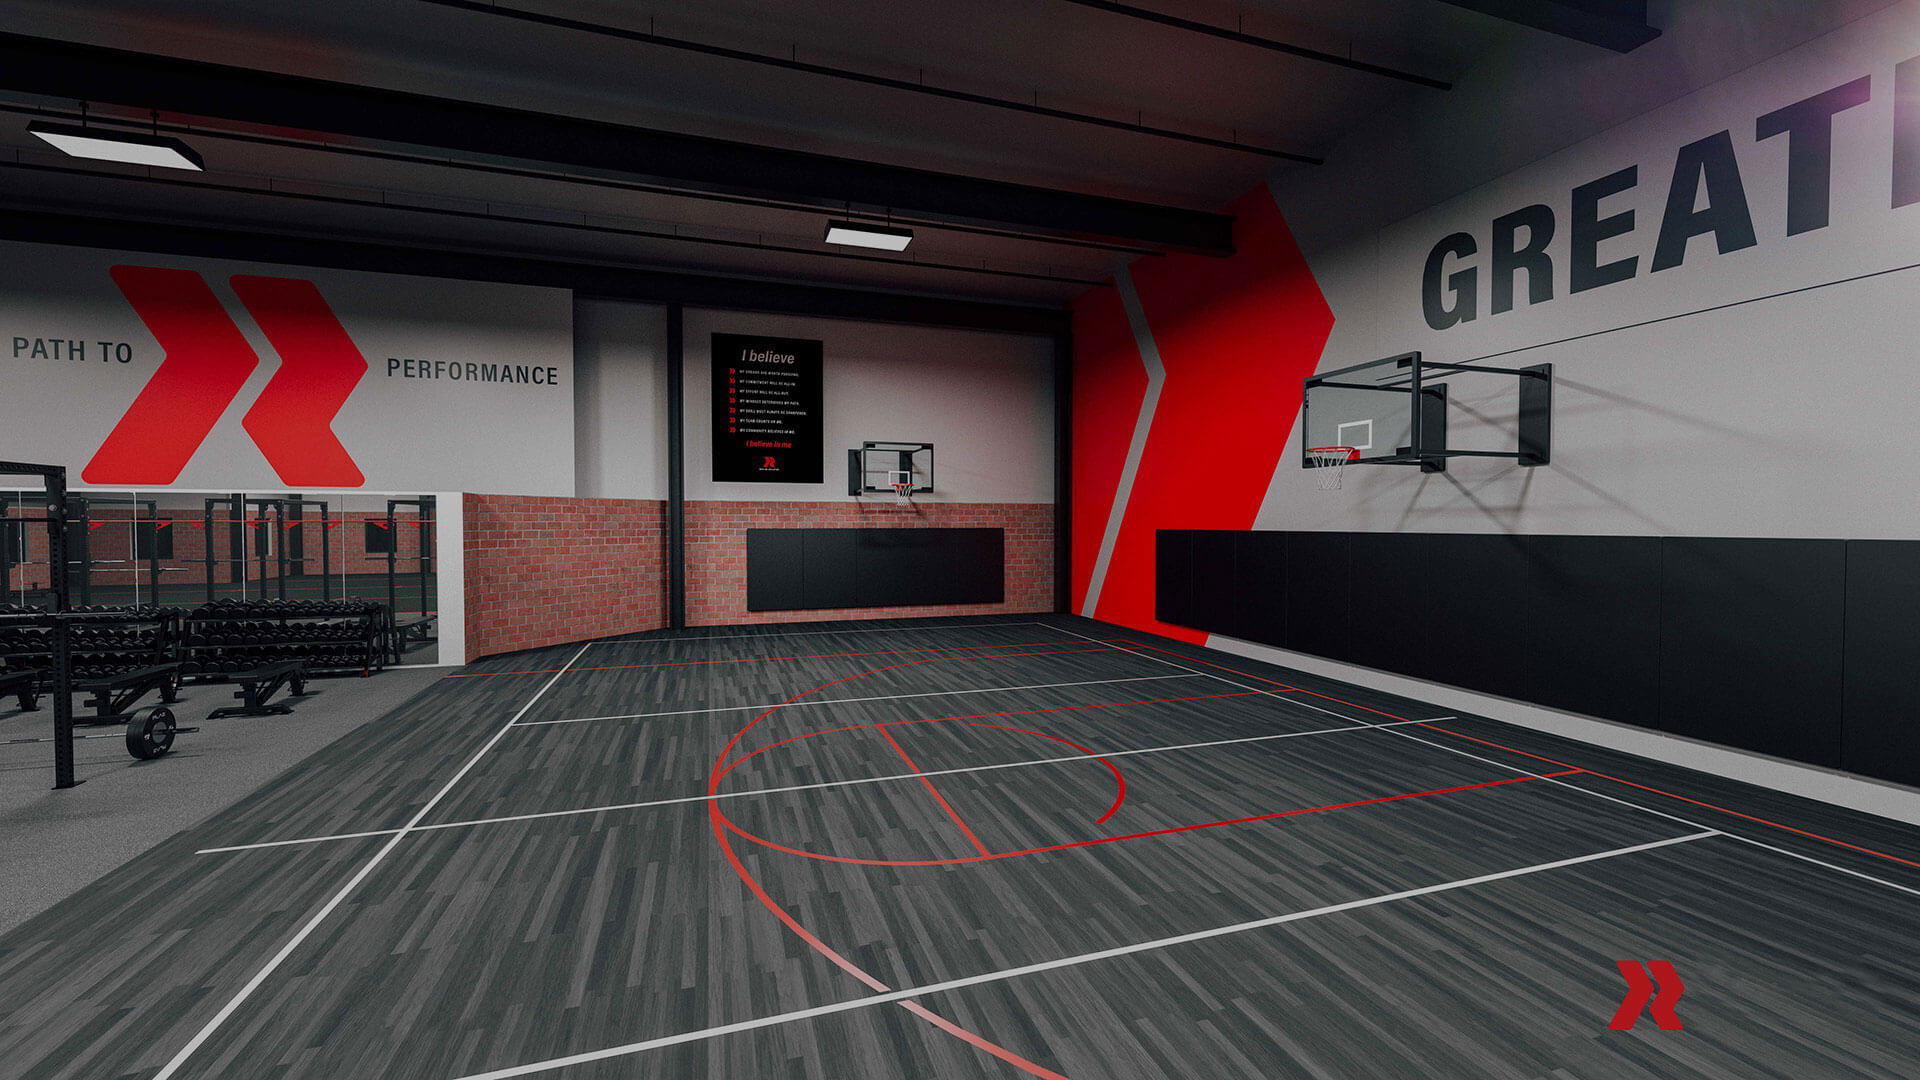 Another view of Redline basketball court.